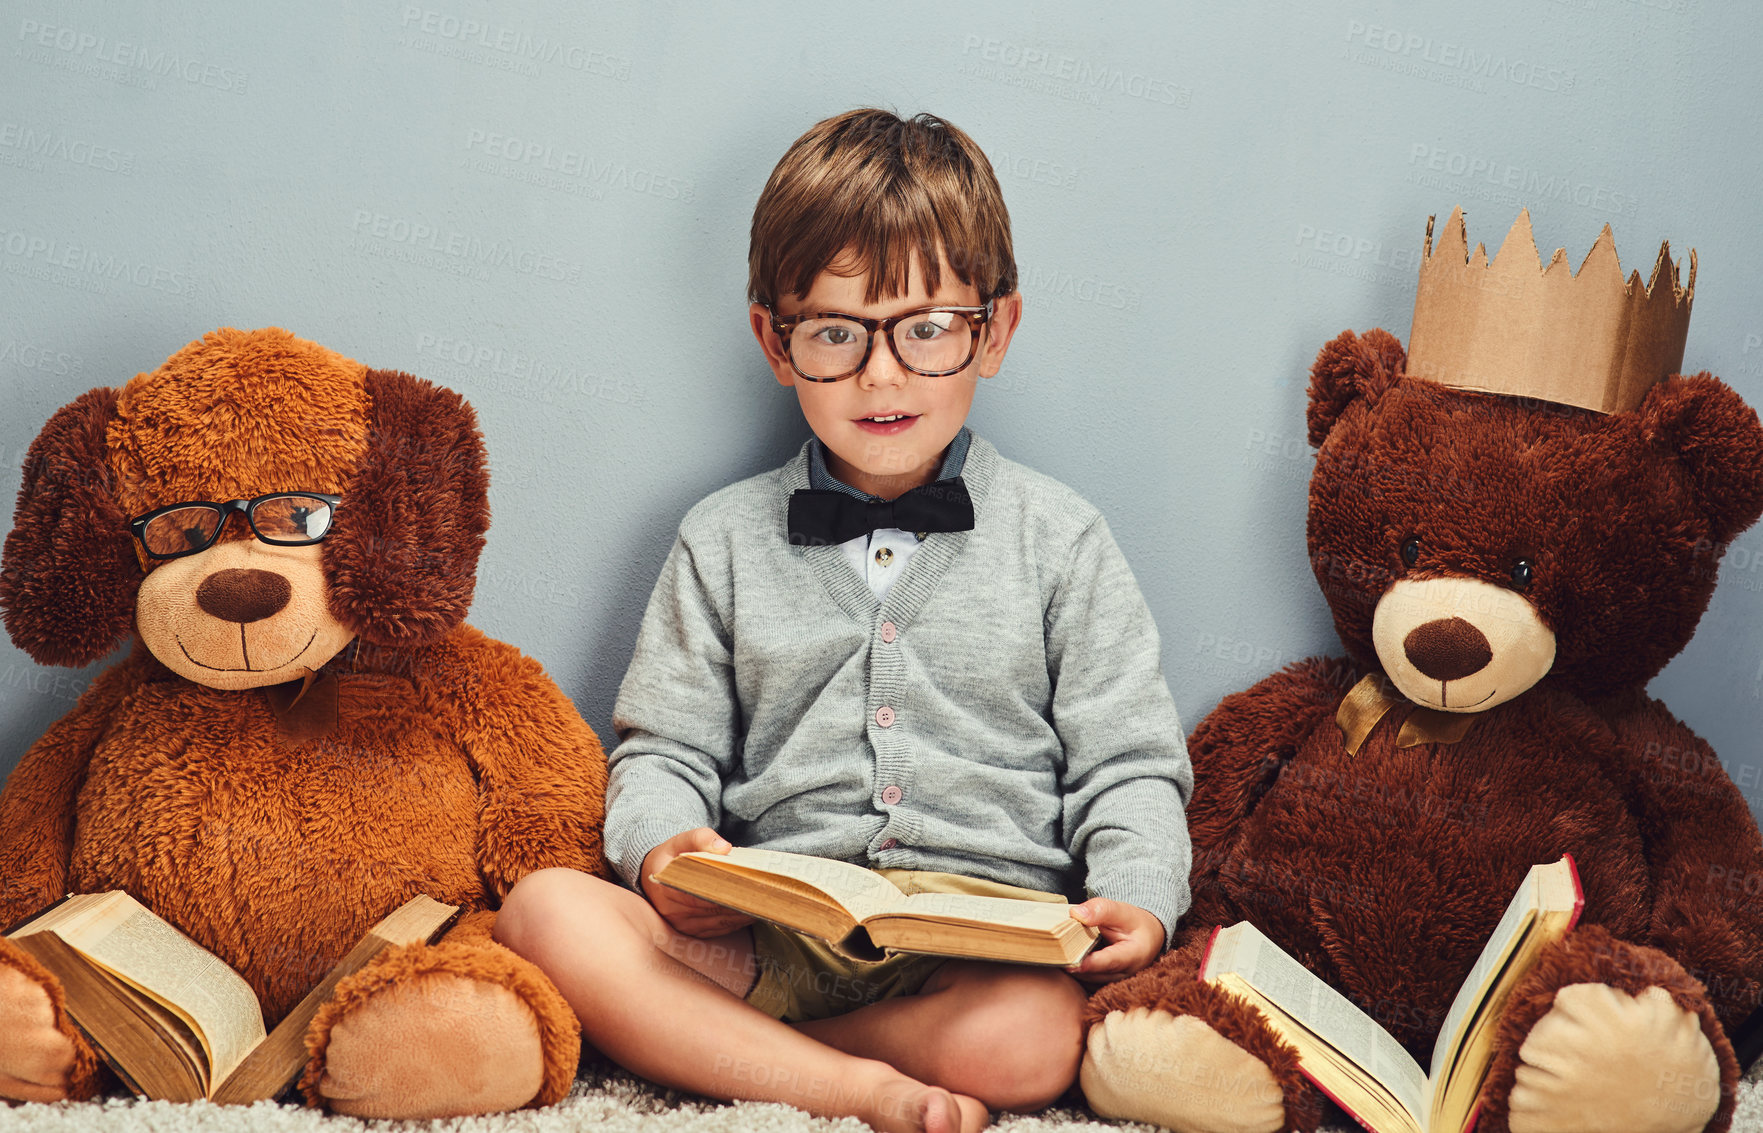 Buy stock photo Studio portrait of a smart little boy reading a book next to his teddy bears against a gray background